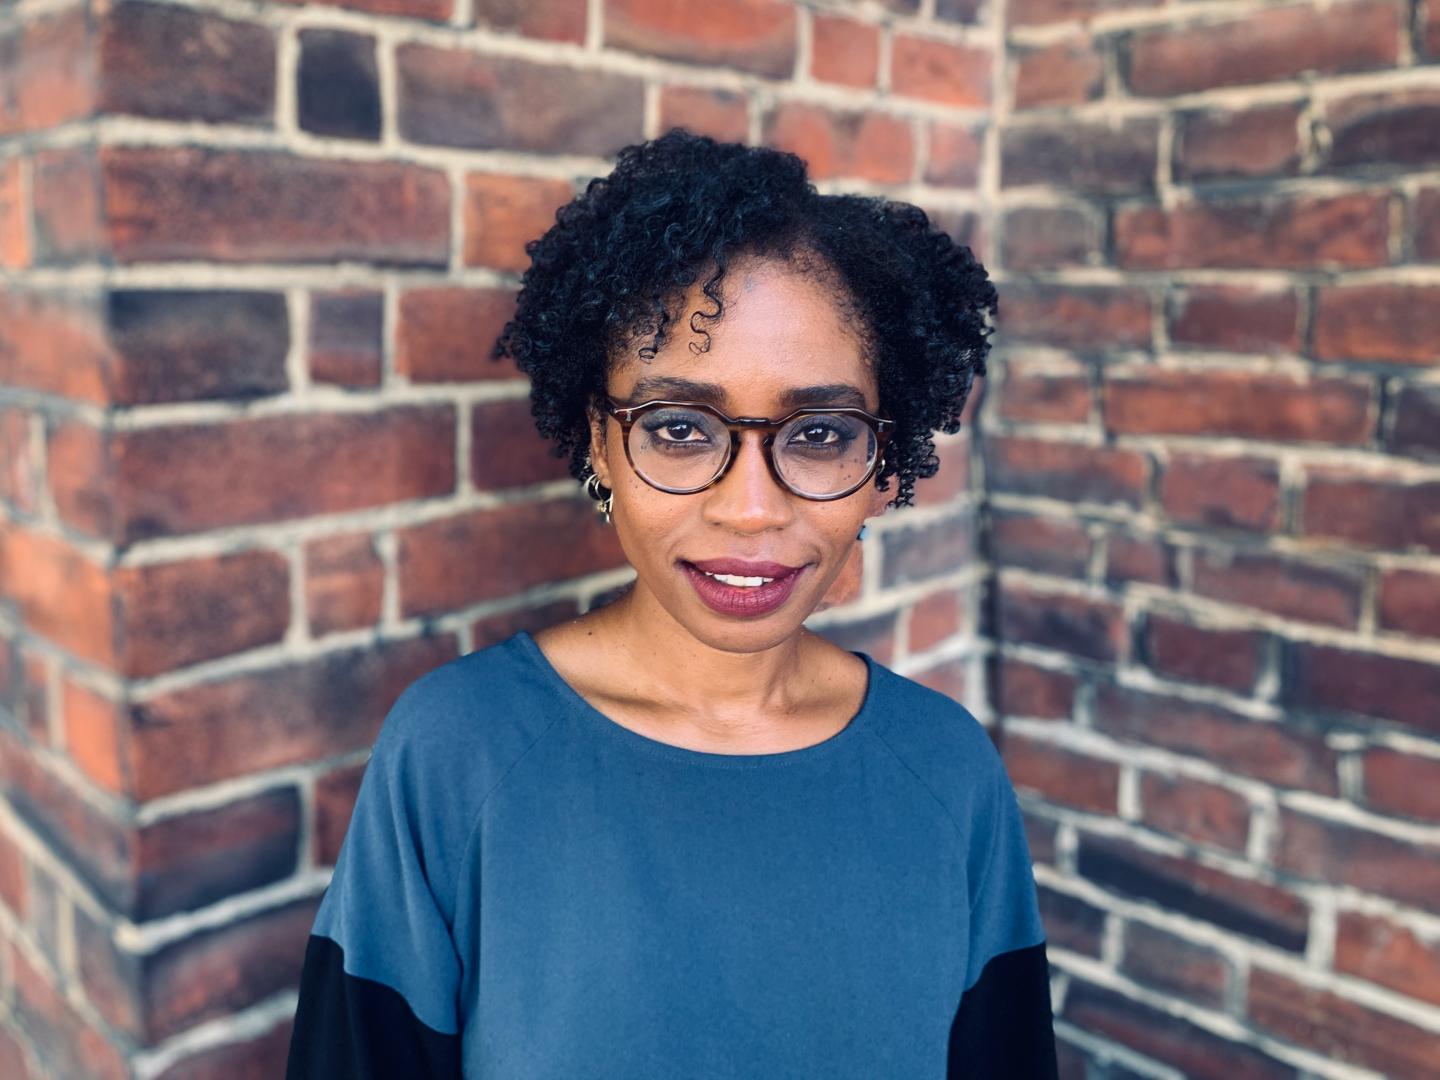 A headshot of Dr Nydia Swaby. Nydia is a Black woman with short black hair, wearing large glasses and a blue t-shirt standing in front of a brick wall. 